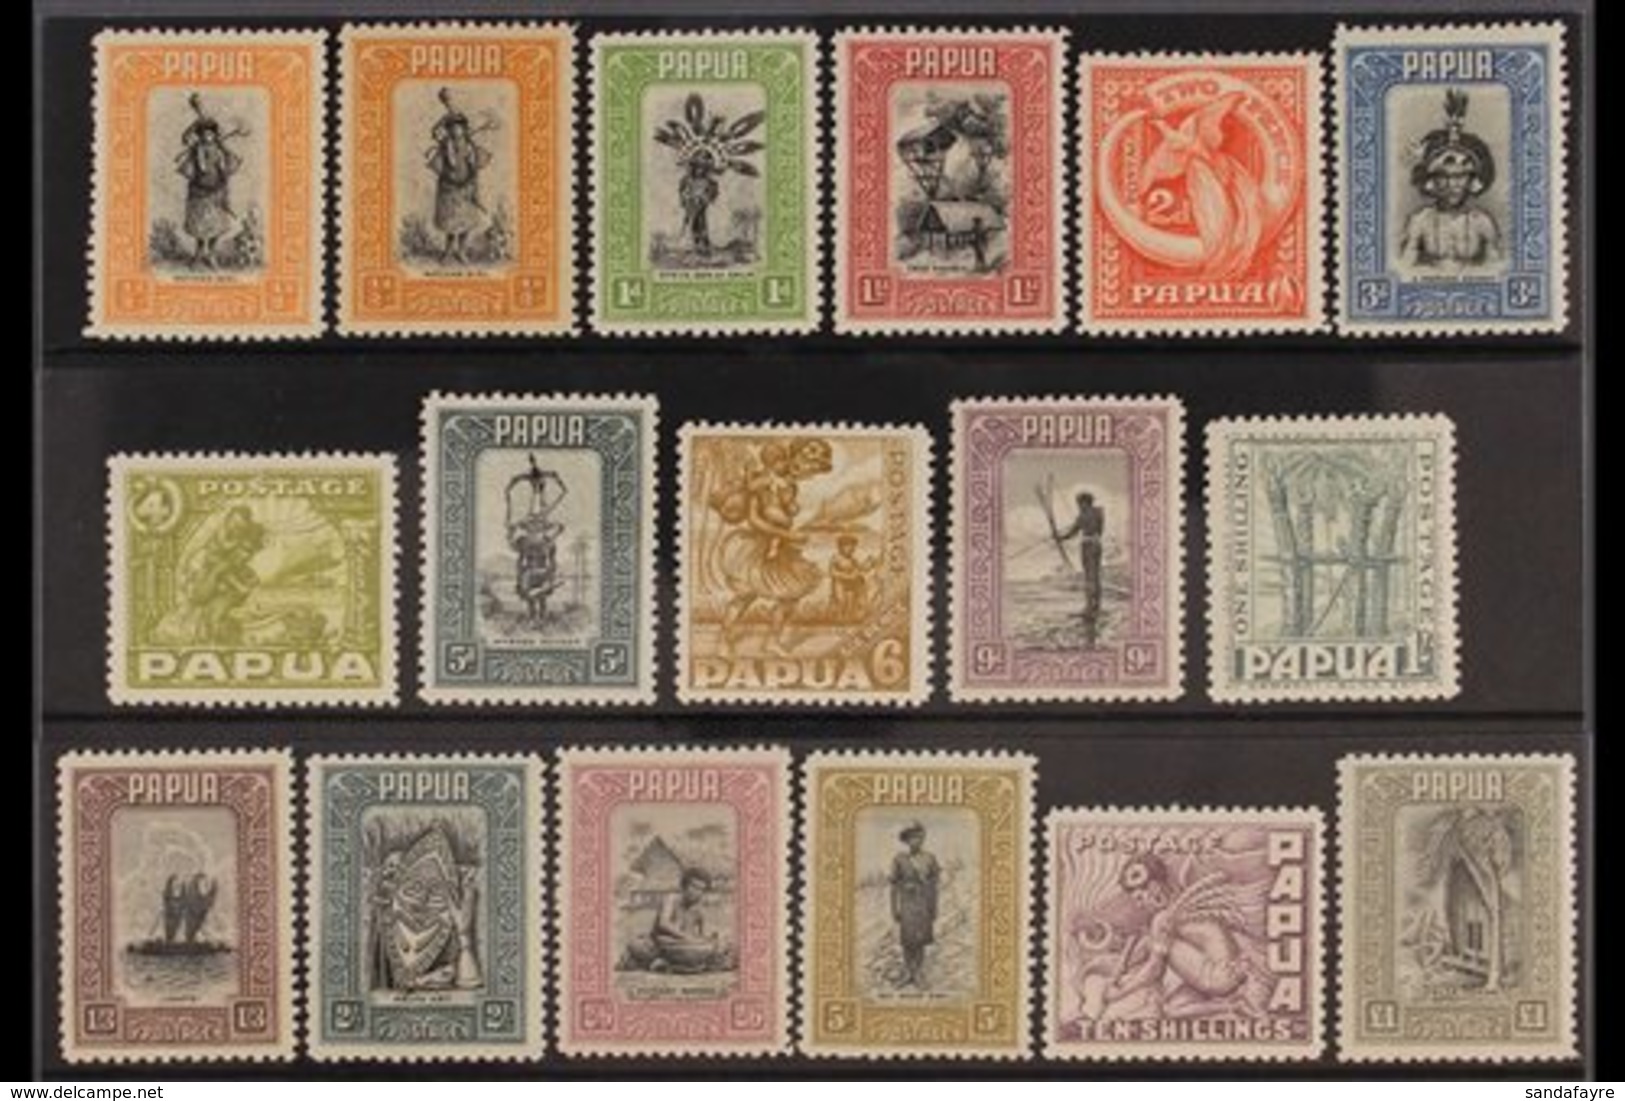 1932-40 Complete Pictorial Definitive Set Including Both ½d Shades, SG 130/145, Mint With Lovely Fresh Colours. (17 Stam - Papúa Nueva Guinea